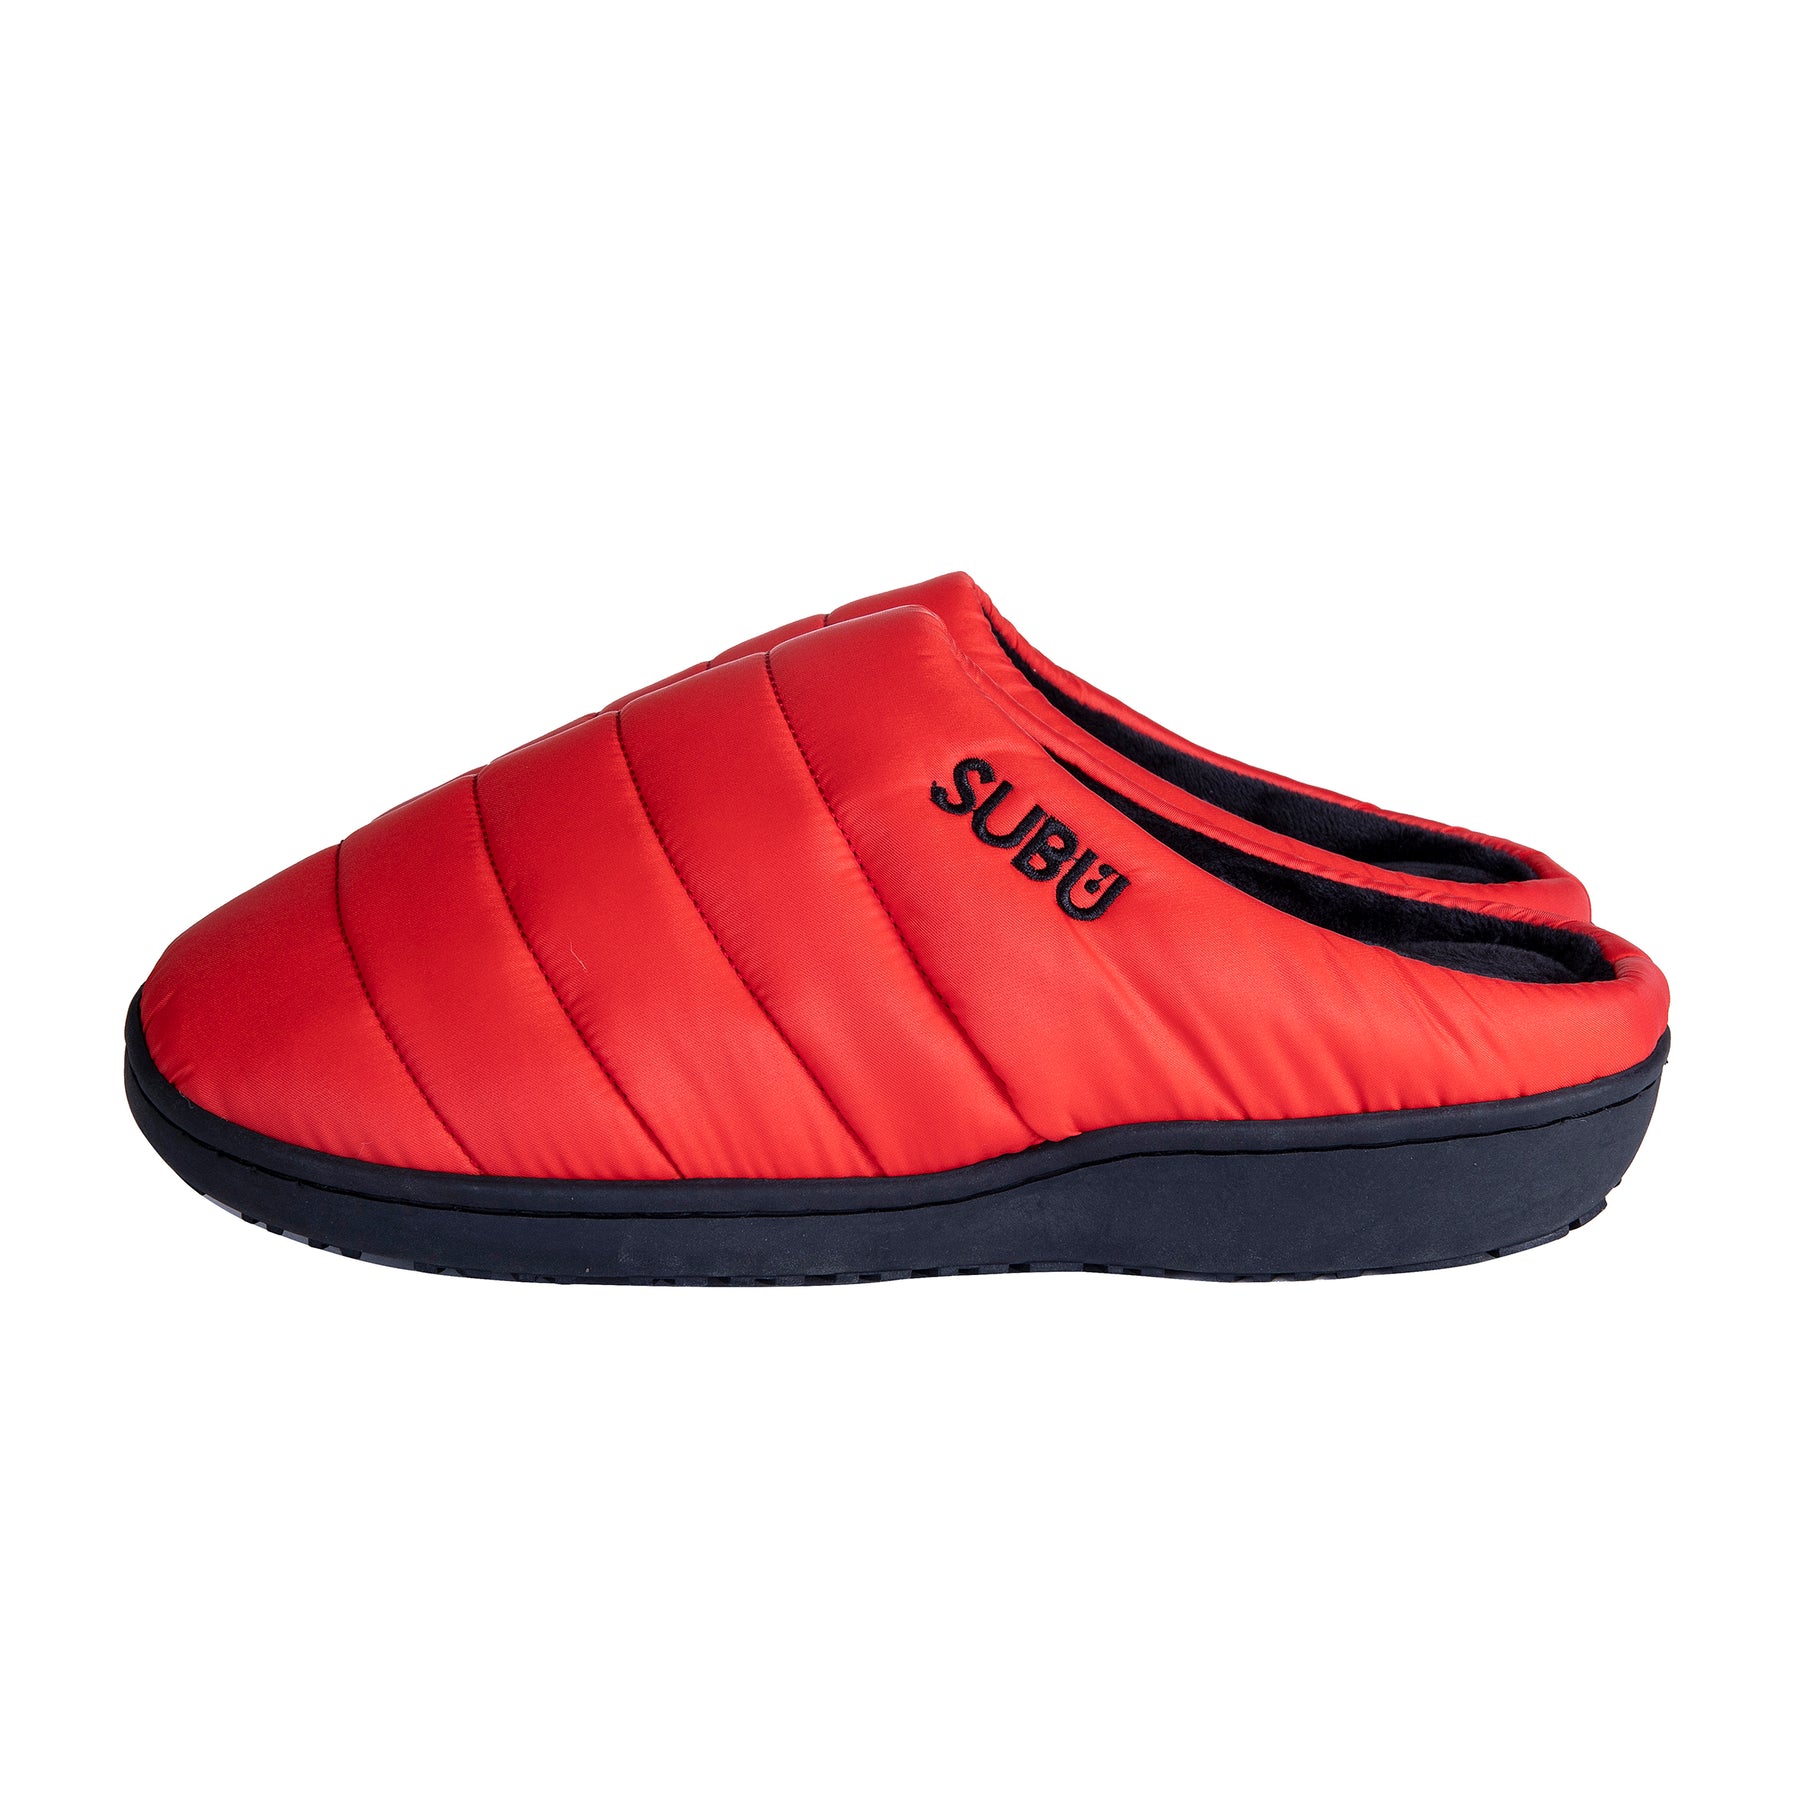 SUBU, Fall & Winter Slippers - Red, 0